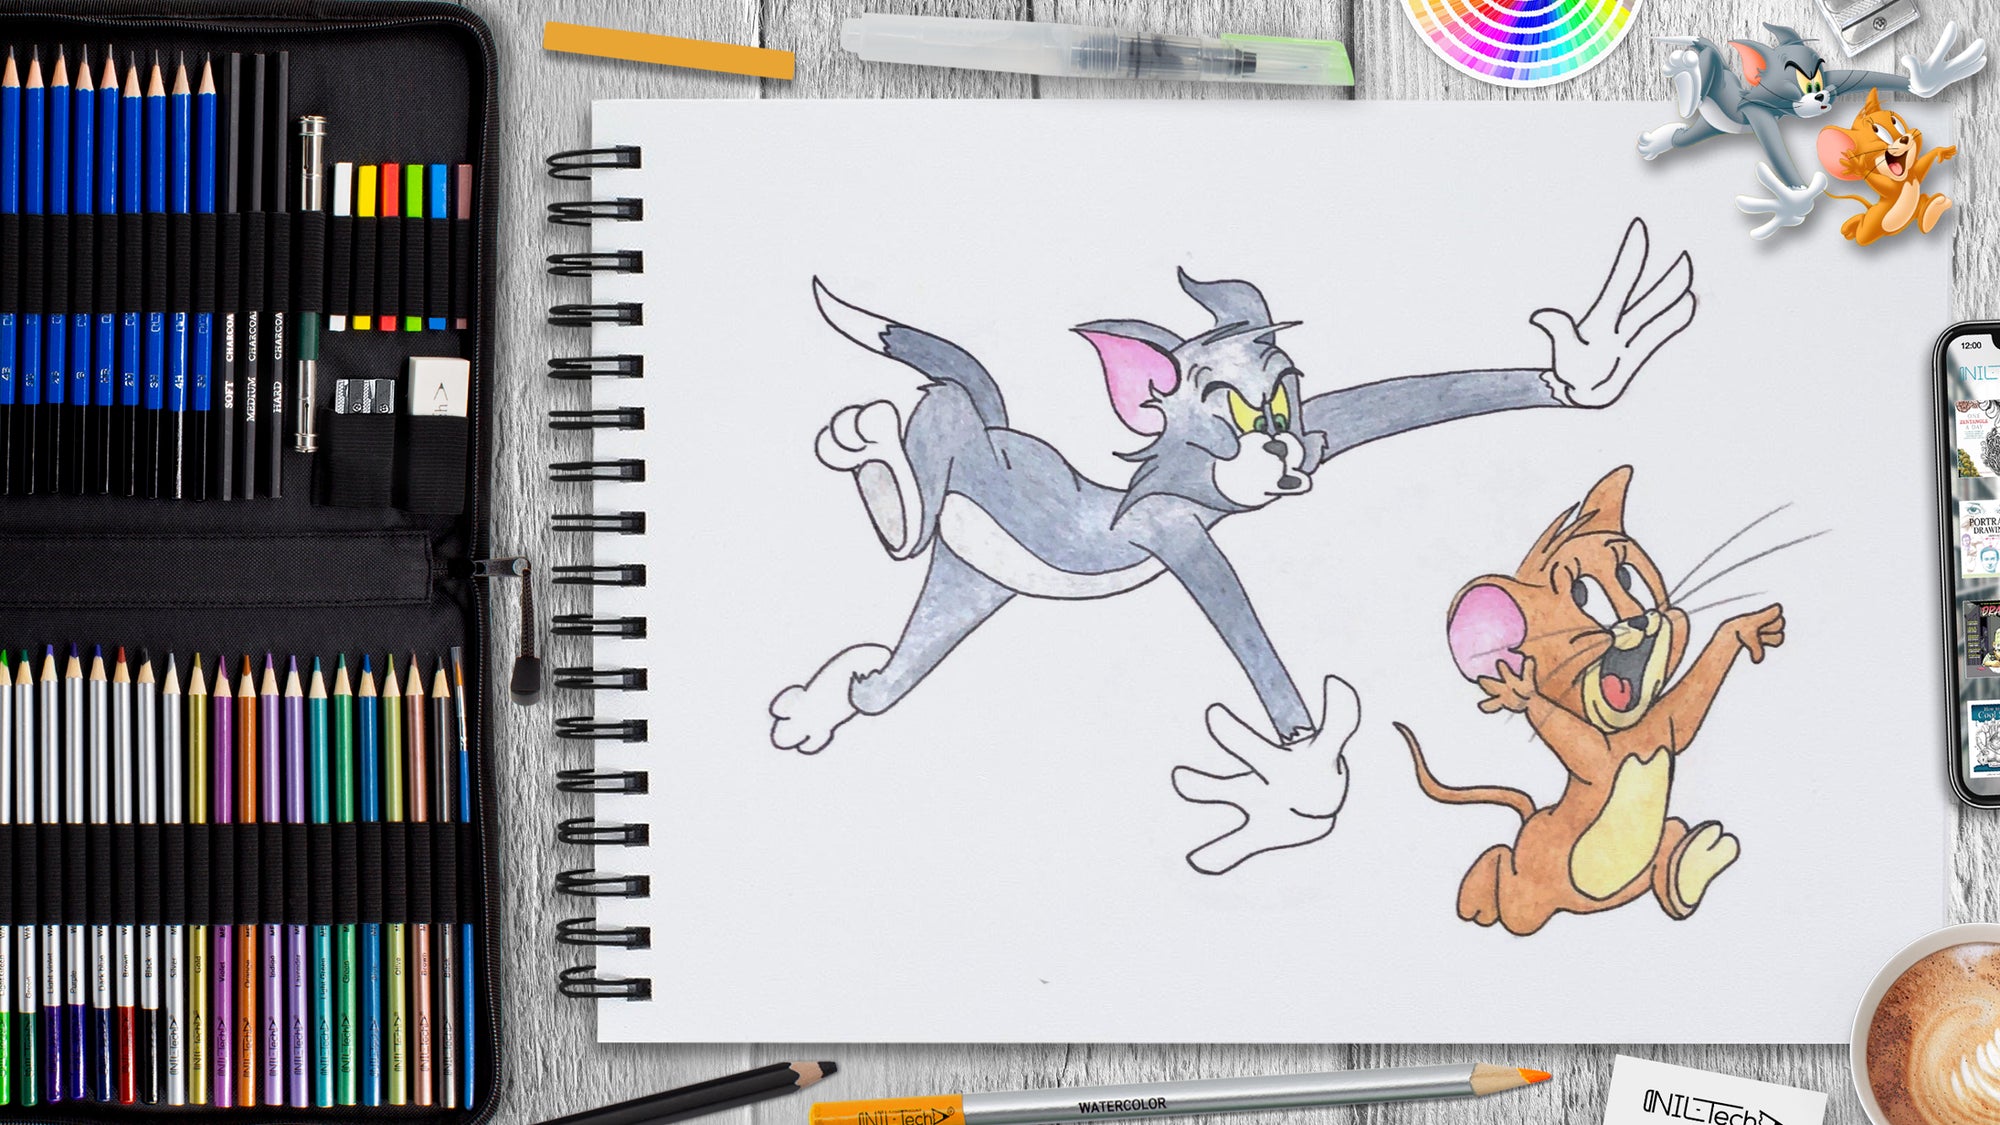 its a pencil drawing of tom and jerry — Hive